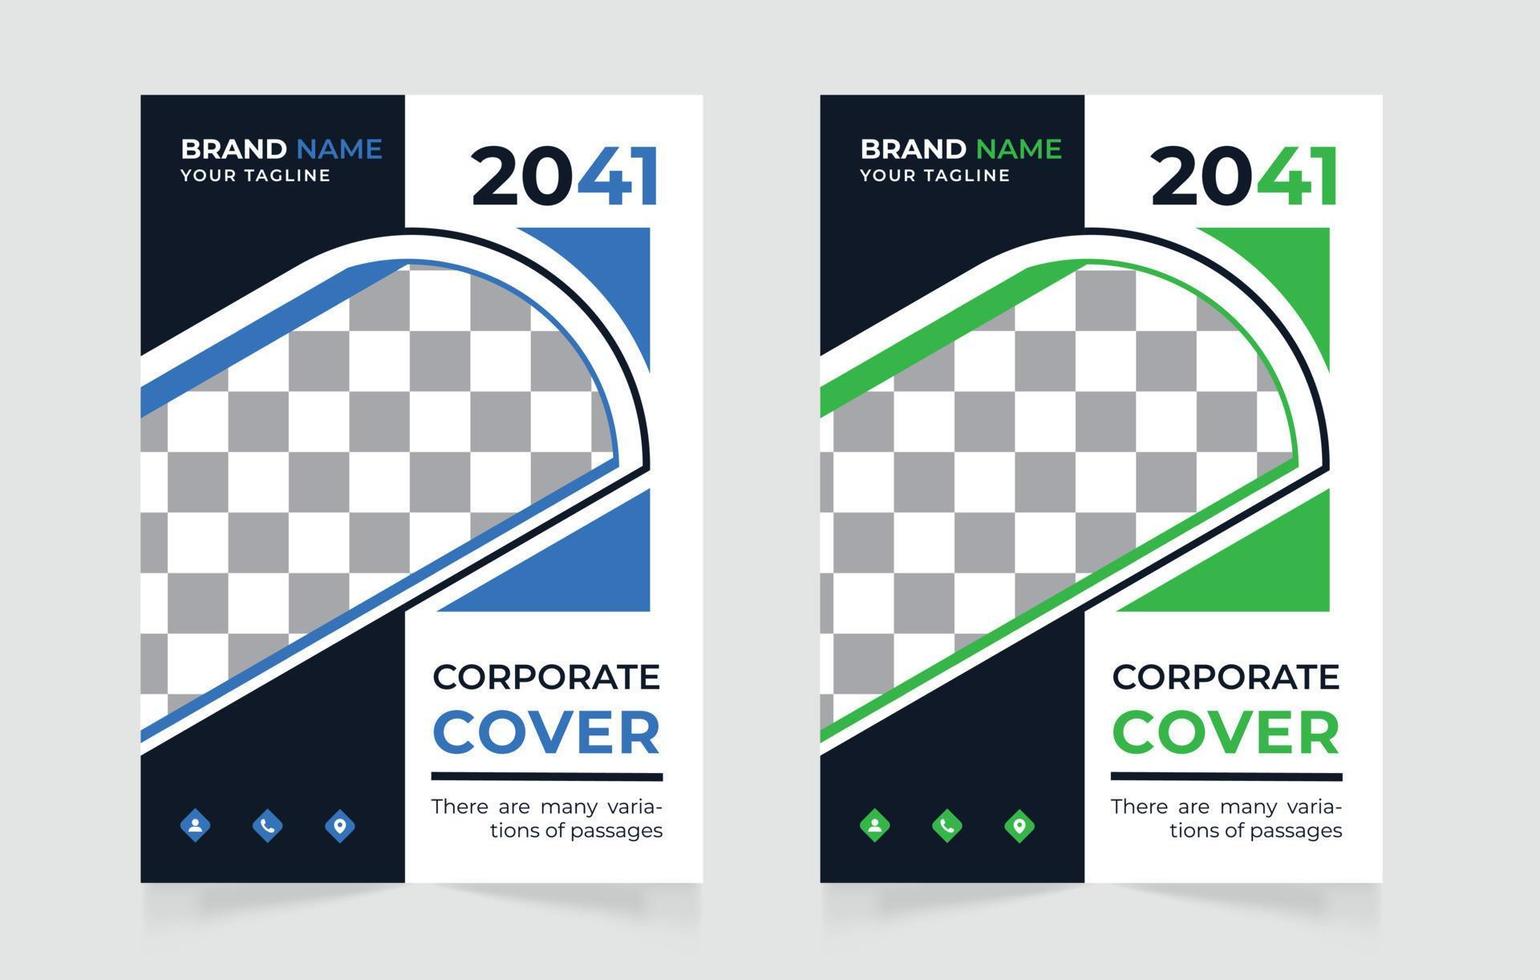 Simple business corporate book cover design template a4 or can be used to annual report, magazine, flyer, poster, banner, portfolio, company profile, website, brochure cover design vector